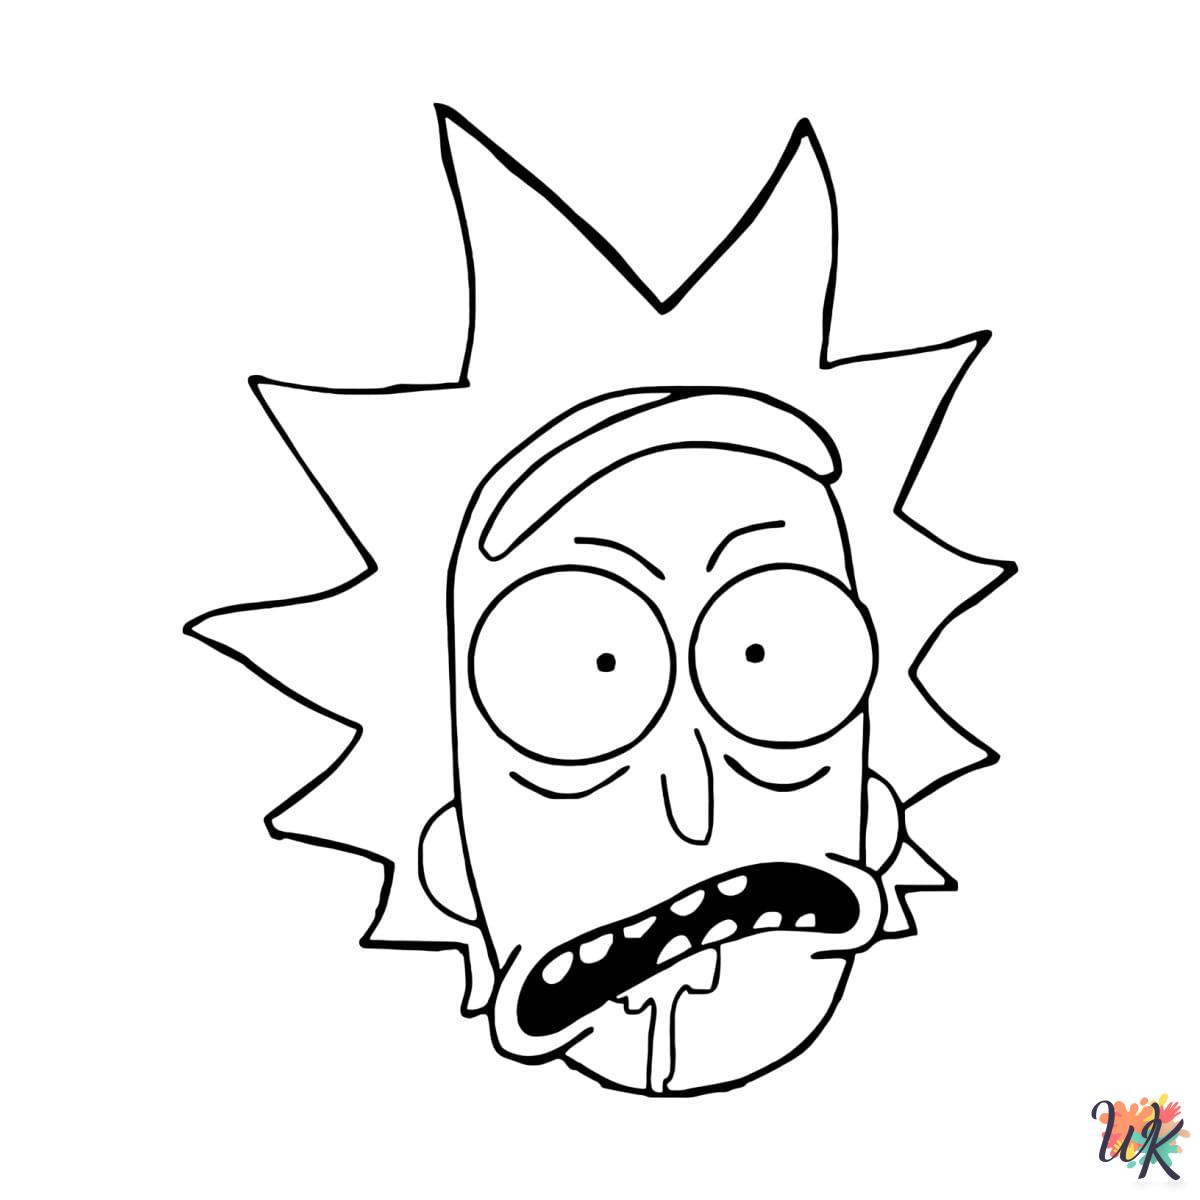 printable Rick and Morty coloring pages